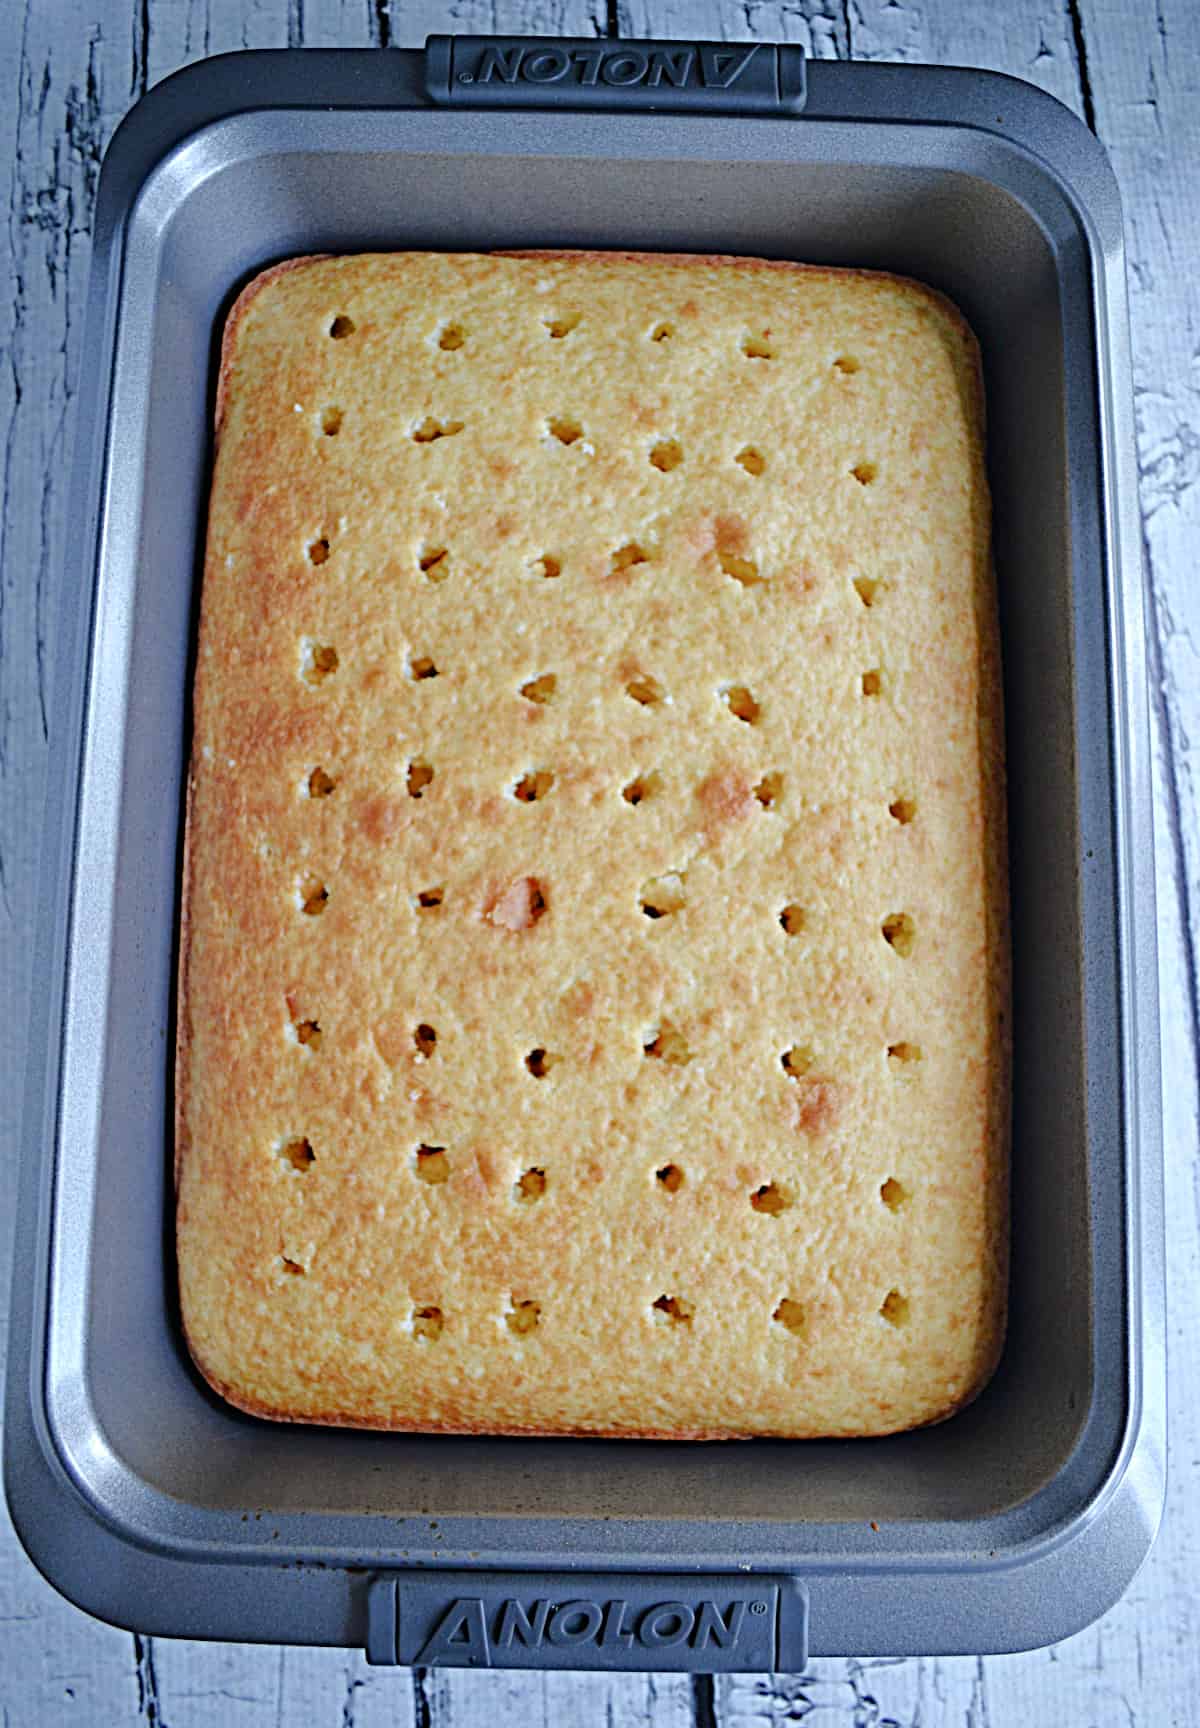 A cake in a pan with holes poked in it.